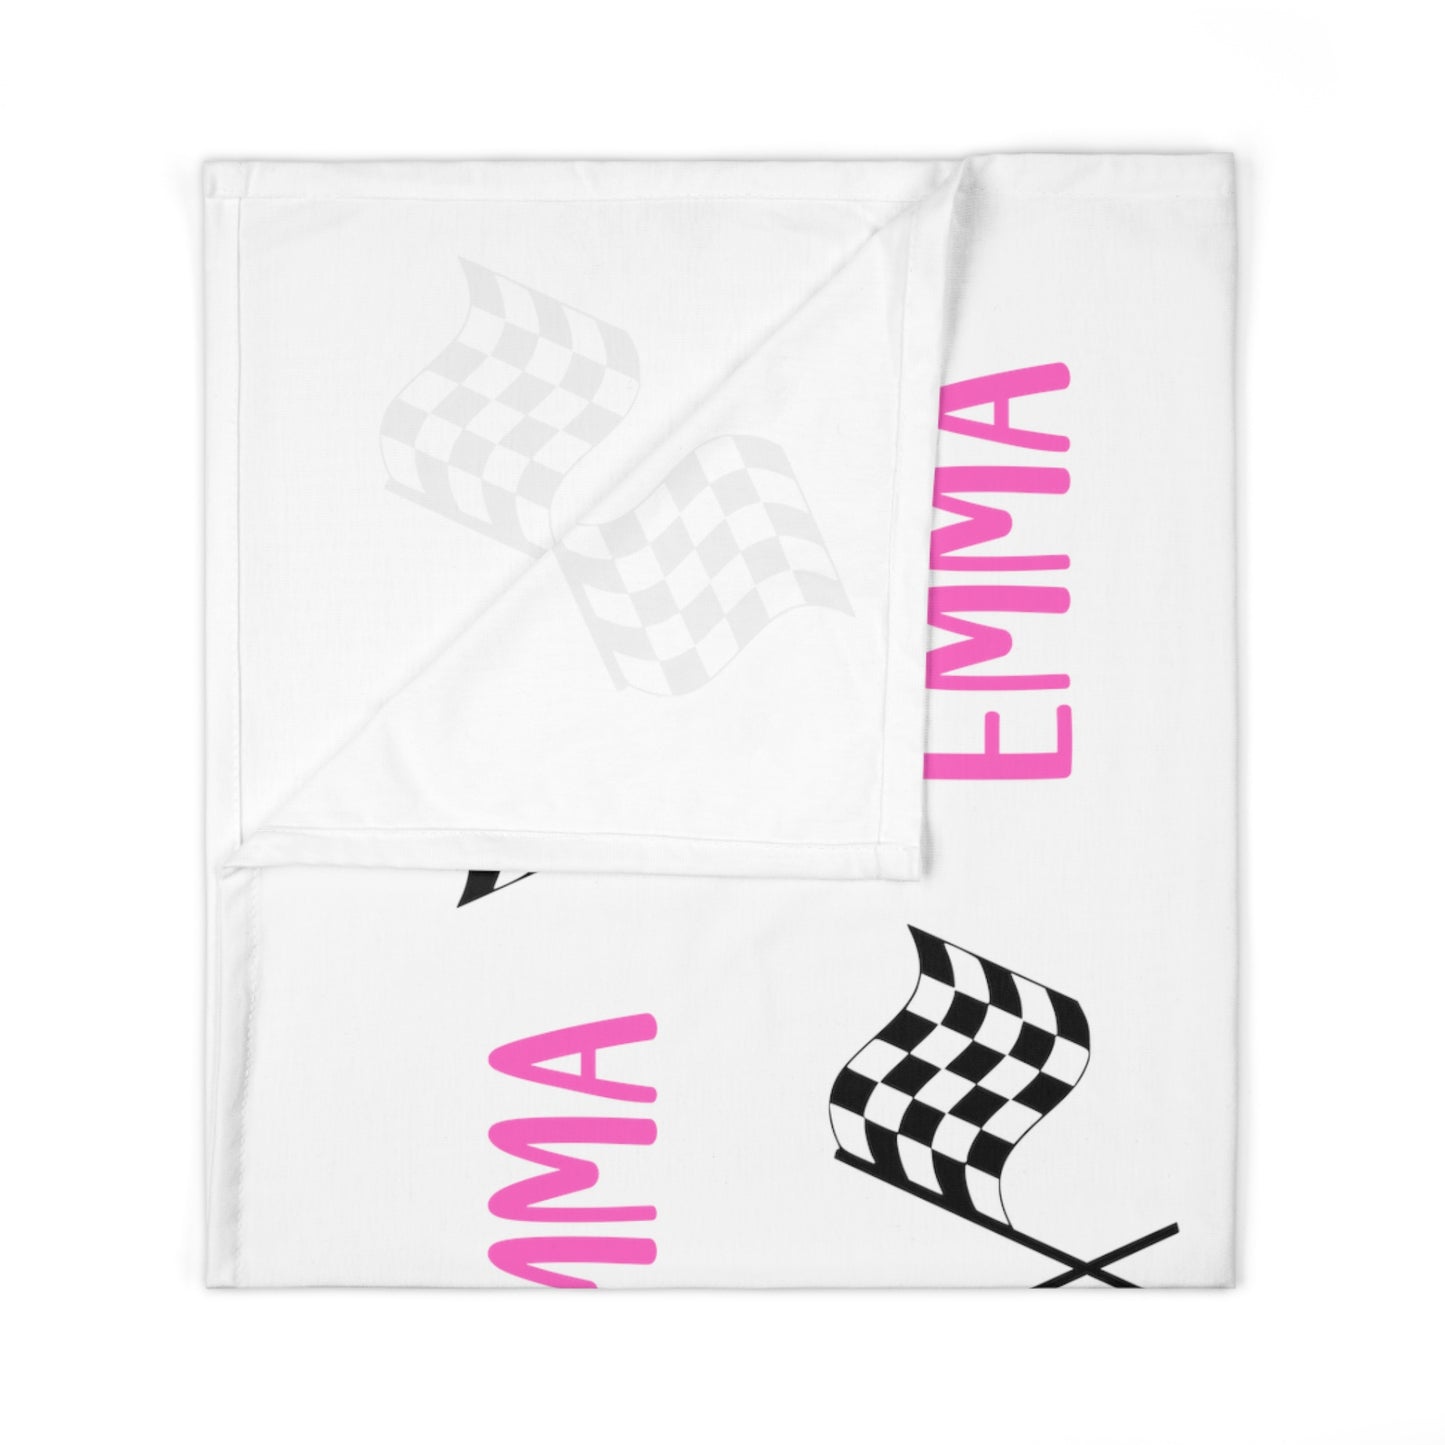 racing chekered flag with name swaddle blanket. Name shown in pink. Printed on one side only